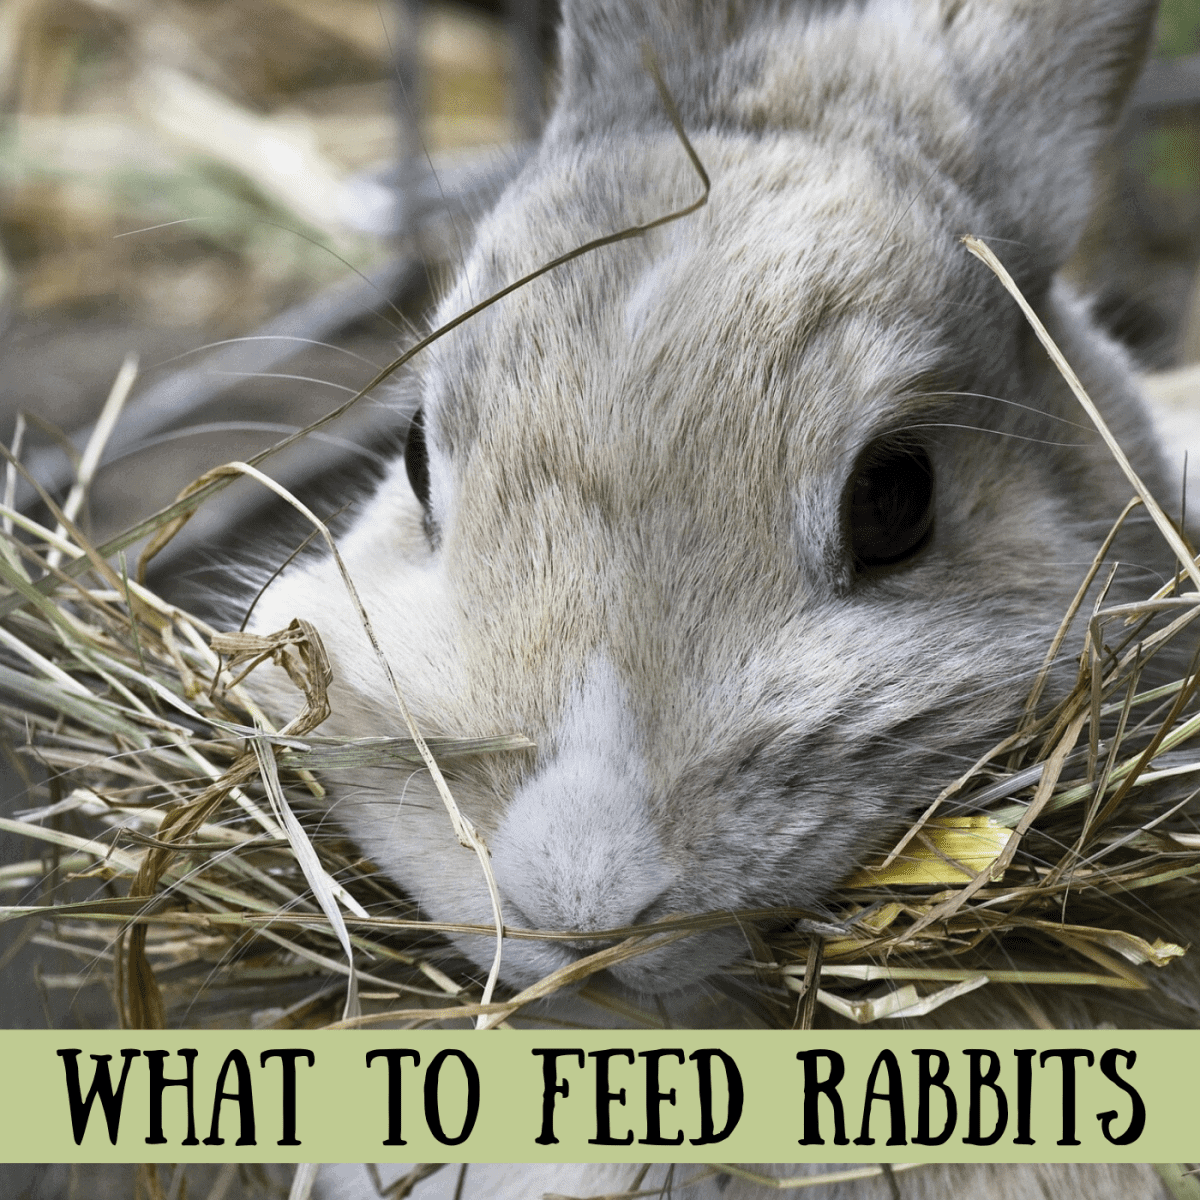 Diet For A 1 Year Old Rabbit